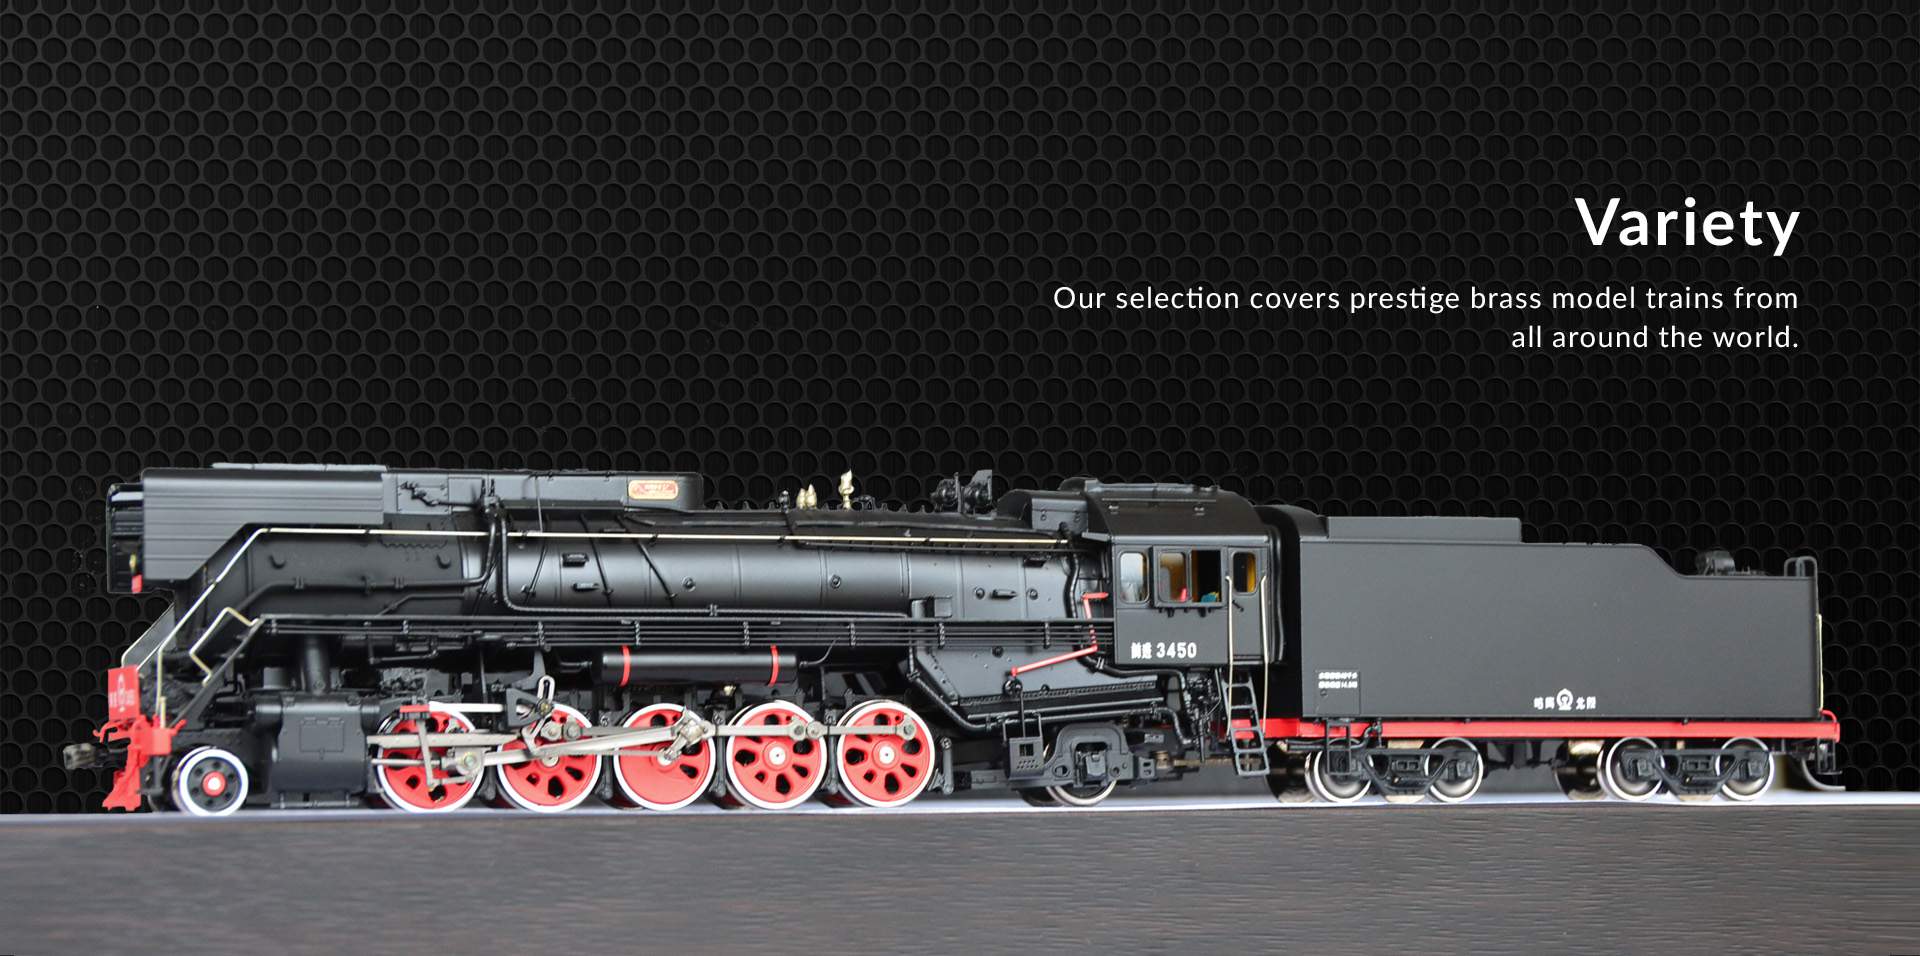 Variety - Our selection covers prestige brass model trains from all around the world.